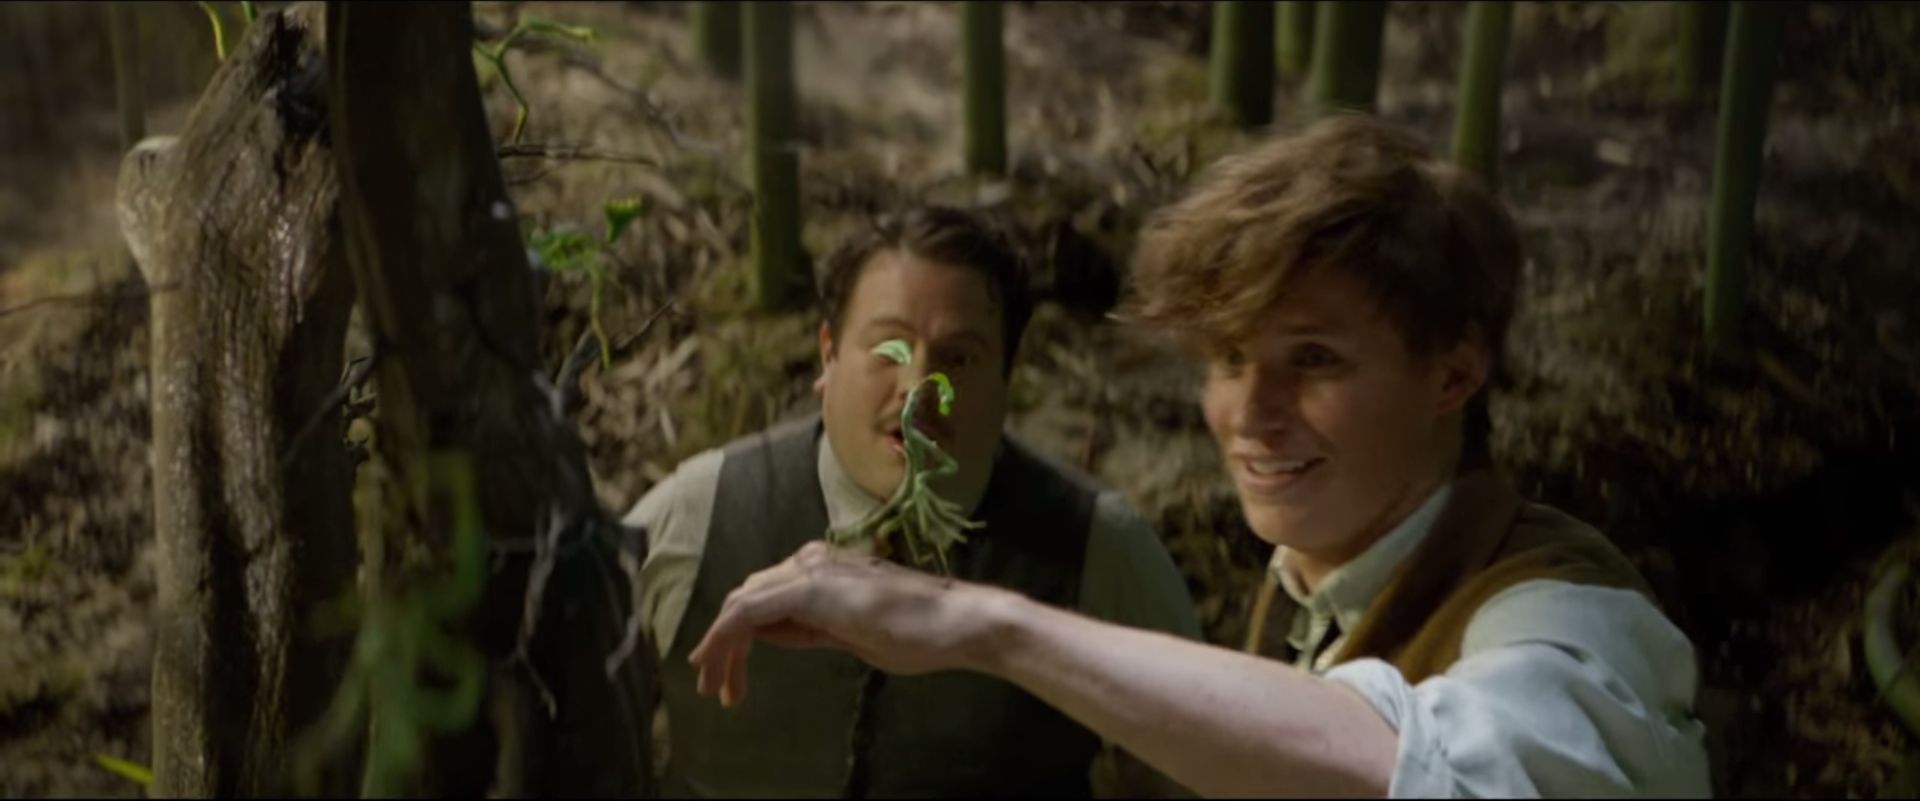 Film Fantastic Beasts And Where To Find Them Watch Online 2016